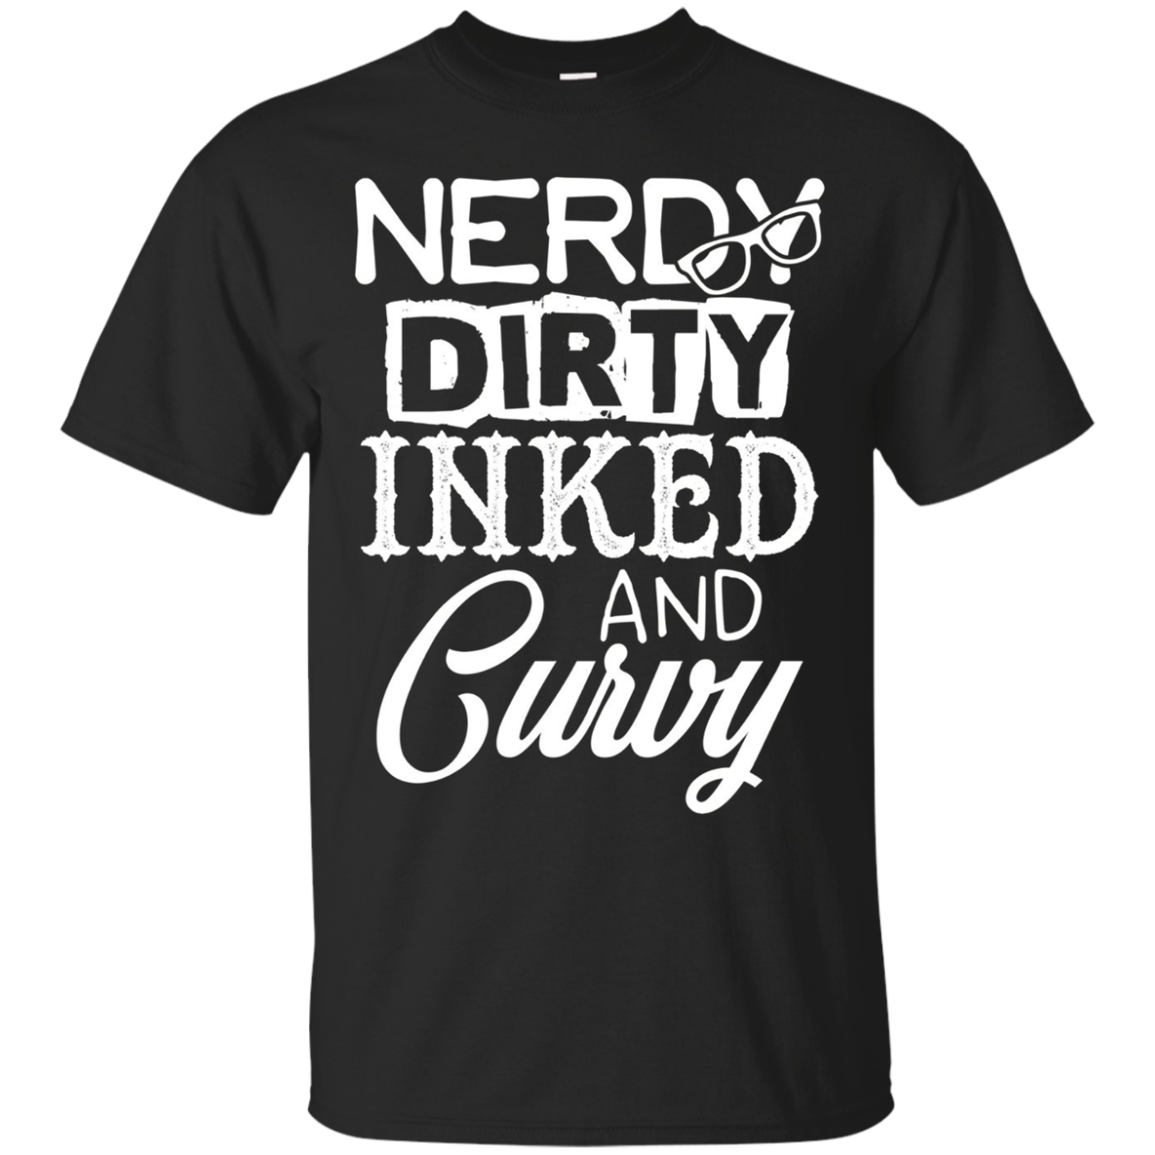 Nerdy Dirty Inked And Curvy Clothing T-shirt